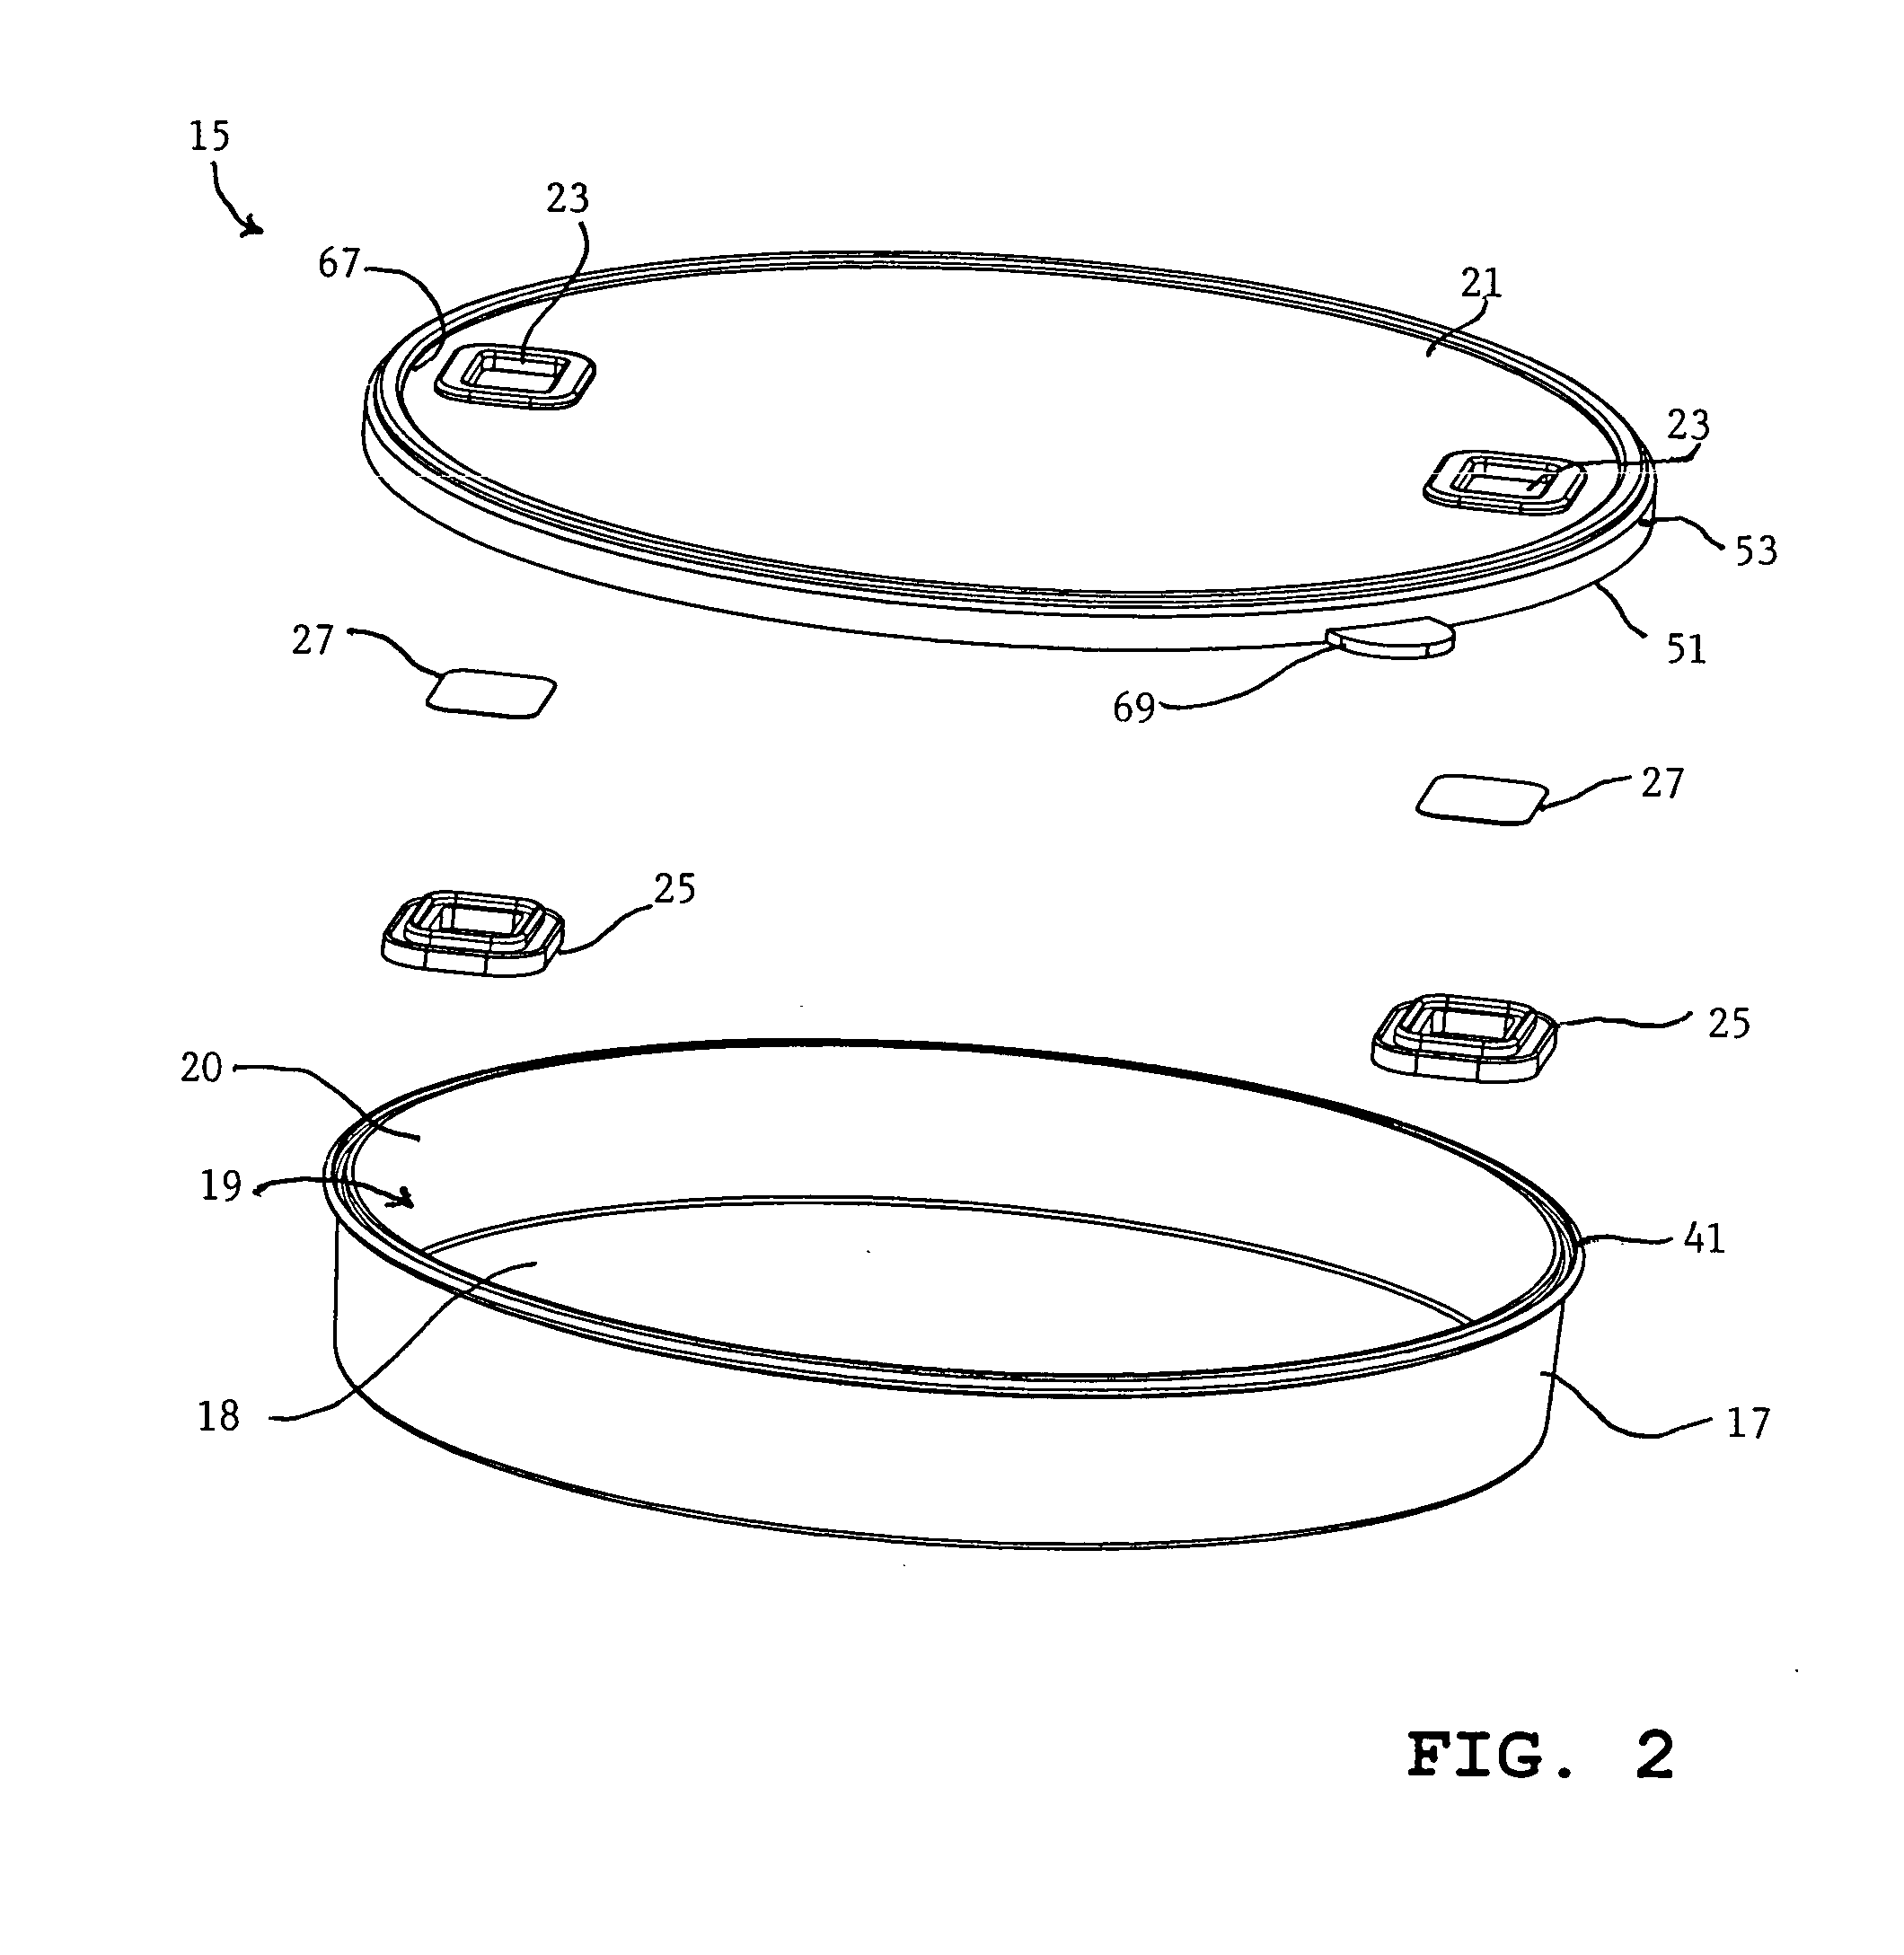 Culturing container with filter vents